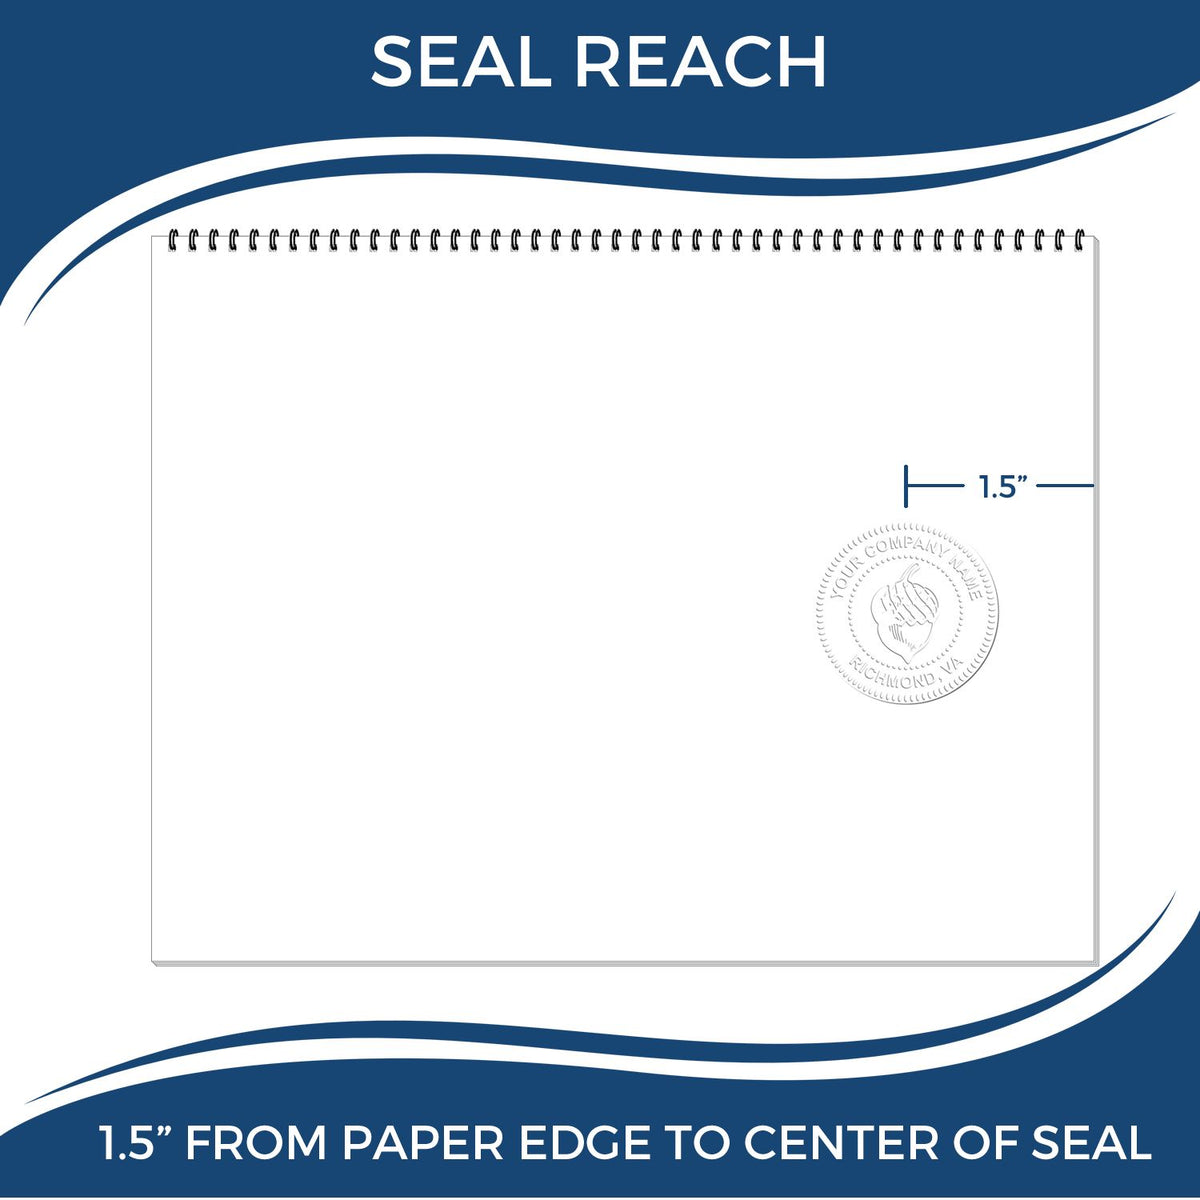 An infographic showing the seal reach which is represented by a ruler and a miniature seal image of the North Carolina Geologist Desk Seal